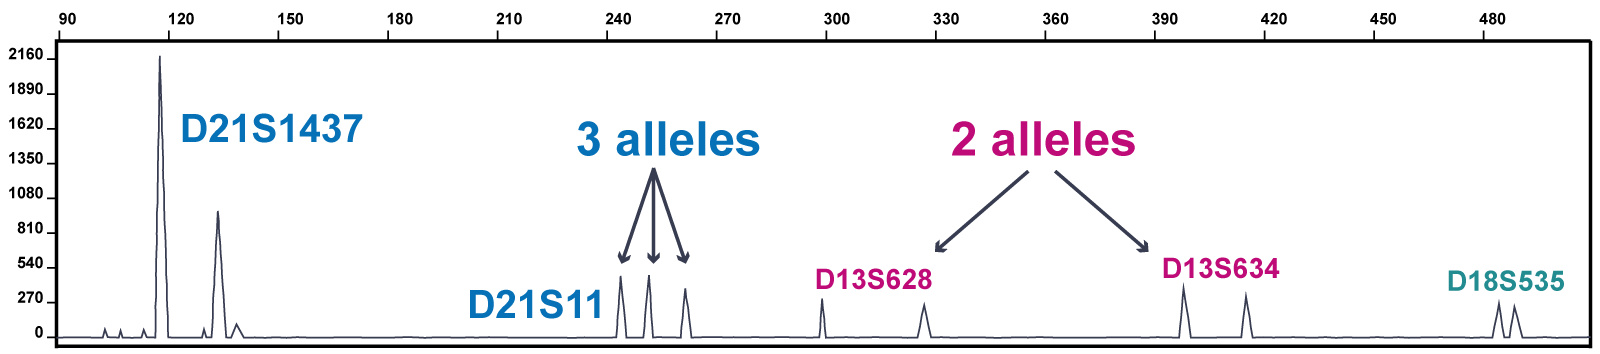 Part of a trace from a QF-PCR test showing the results from several markers across chromosomes 13, 18 and 21 (the marker labels begin D13, D18 and D21 to indicate the chromosome of origin). This trace shows trisomy 21. The marker D21S1437 has an abnormal peak ratio: the first peak is twice the height of the second peak. The marker D21S11 has an abnormal number of peaks (three). The markers from the other chromosomes show two peaks of equal height.